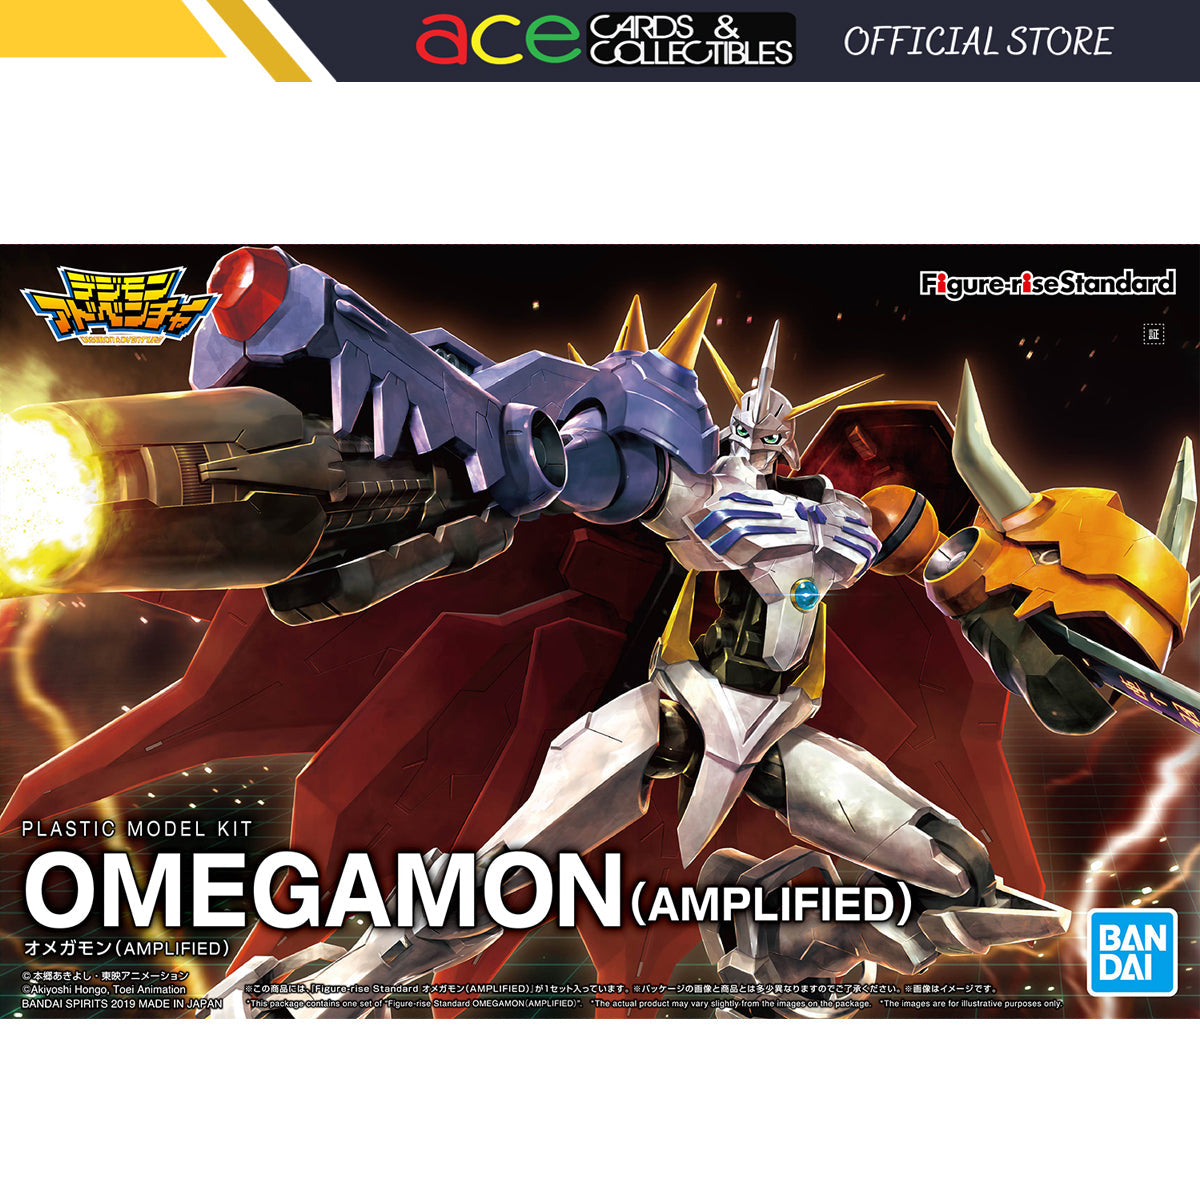 Digimon Figure-rise Standard Omegamon (Amplified)-Bandai-Ace Cards & Collectibles